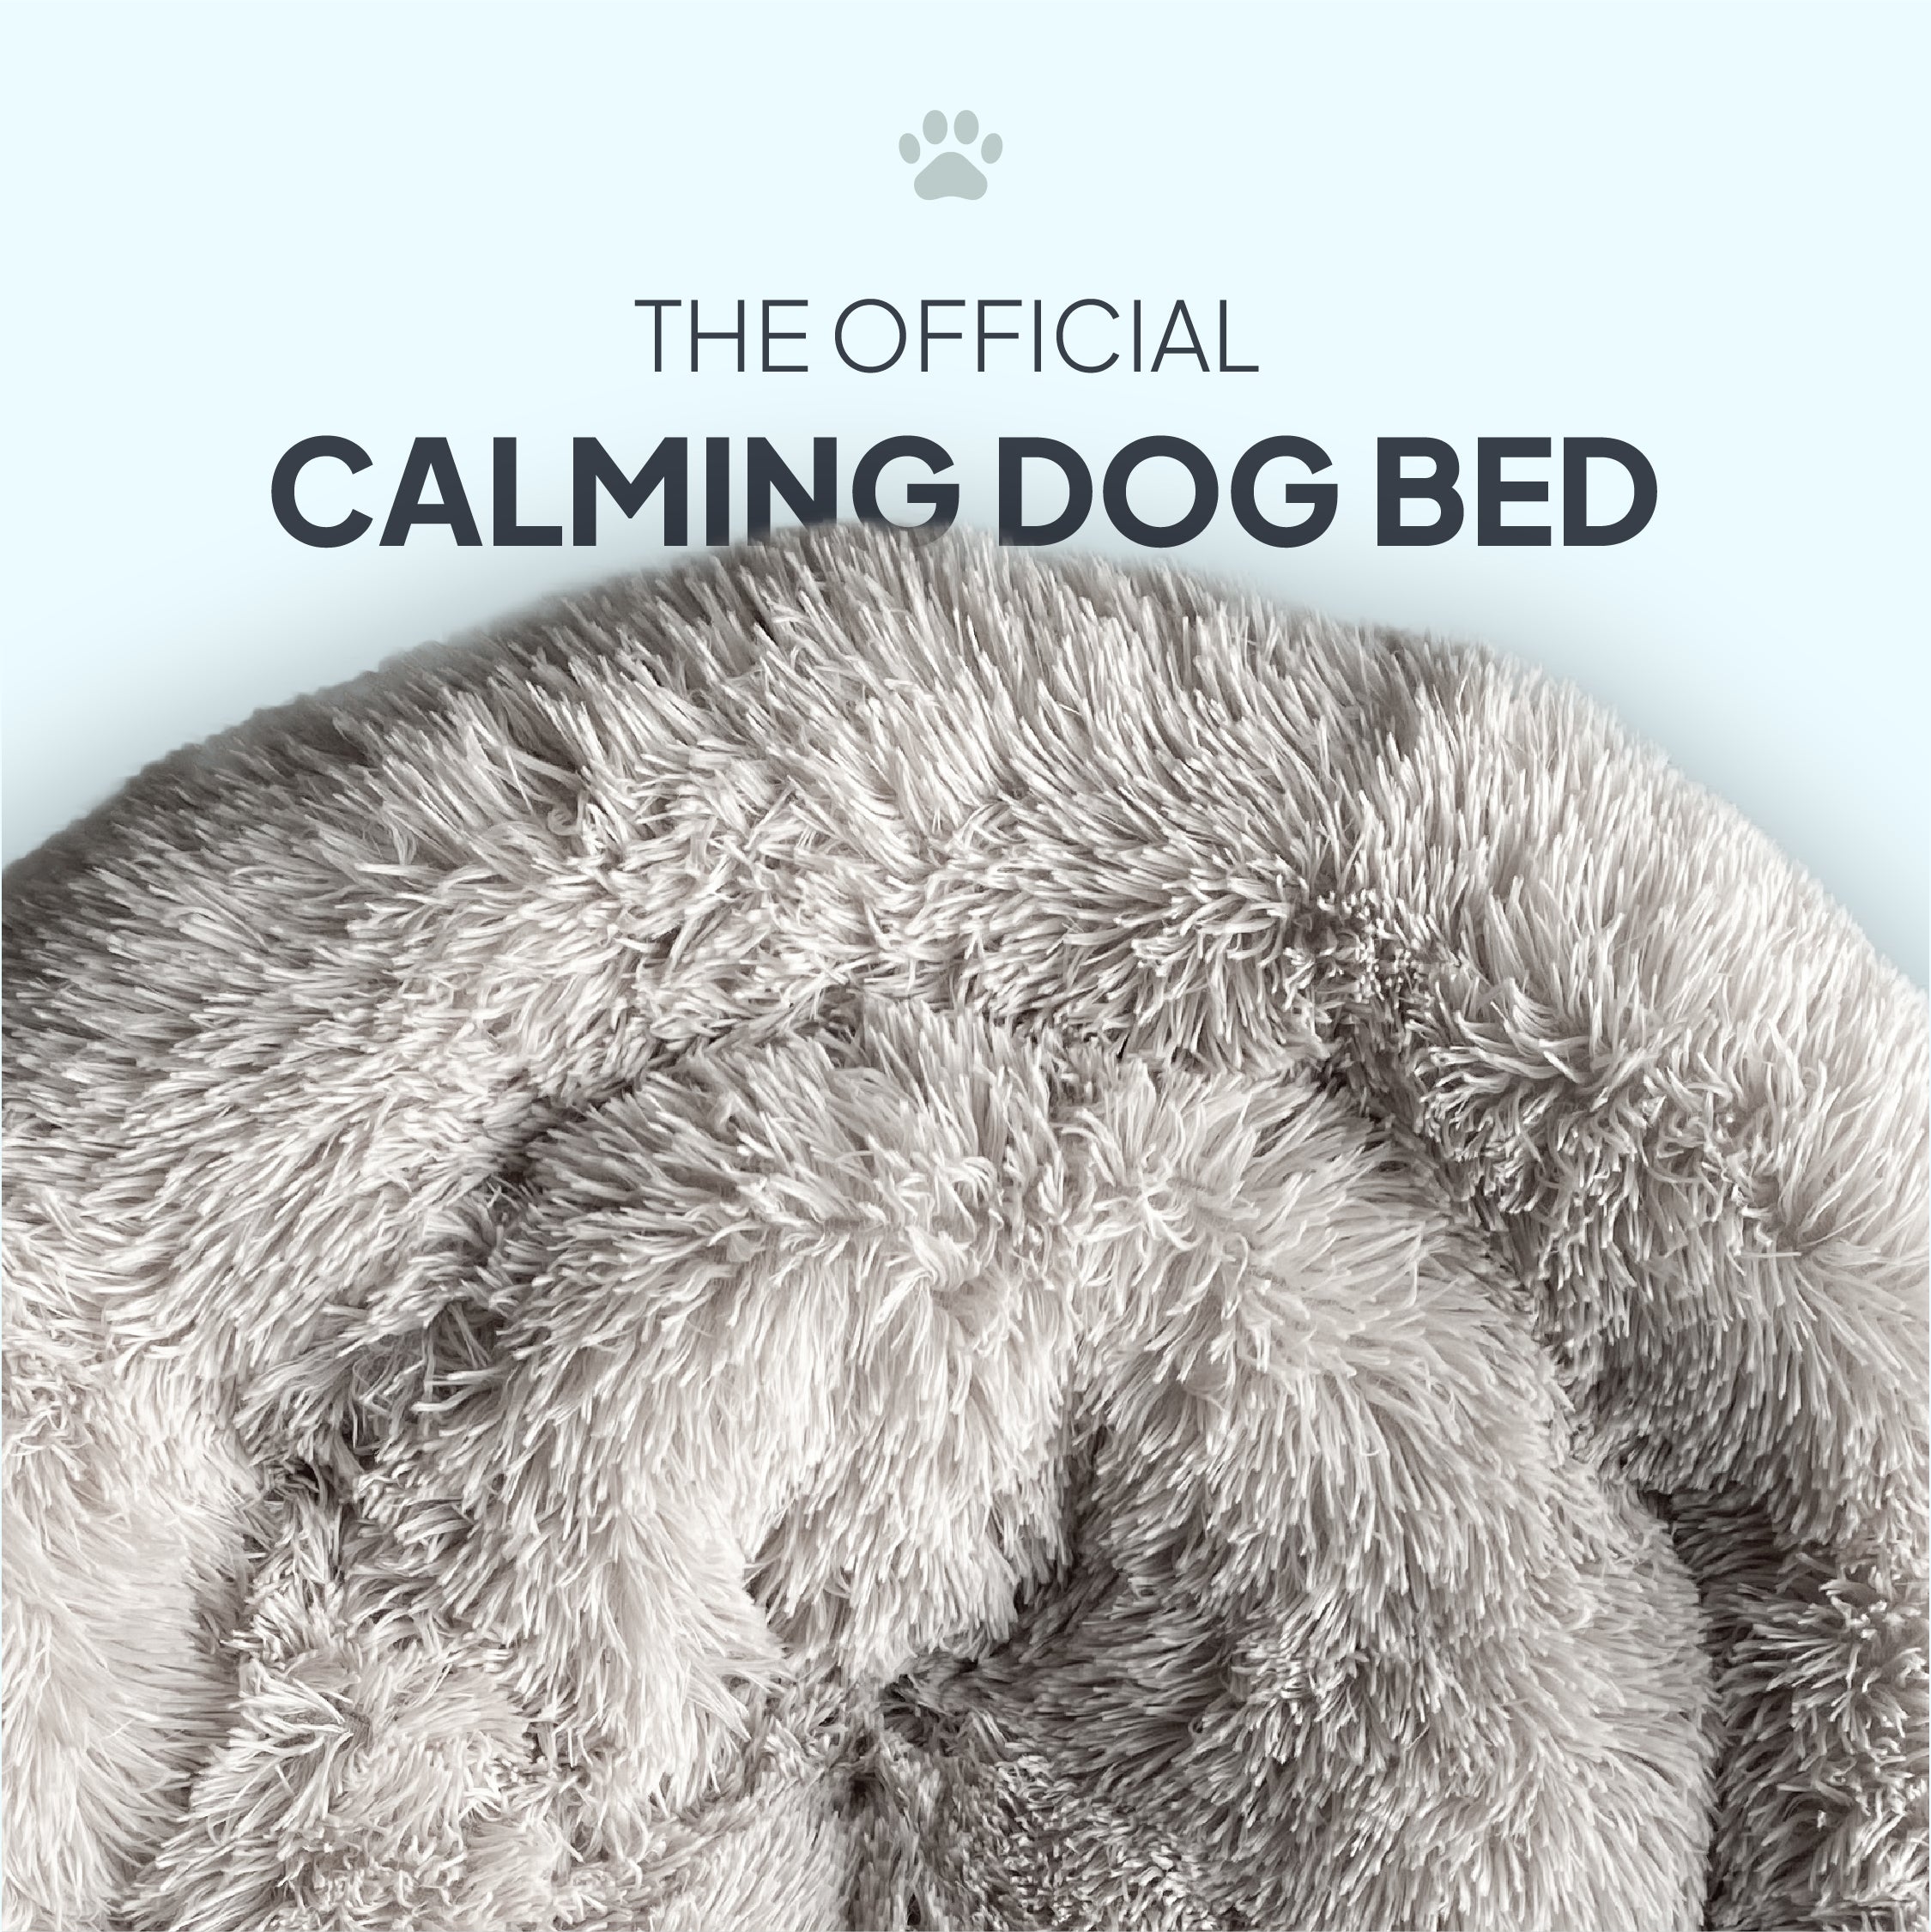 The Original Calming Dog beds: HOLIDAY CLEARANCE - Upto 60% off TODAY only!